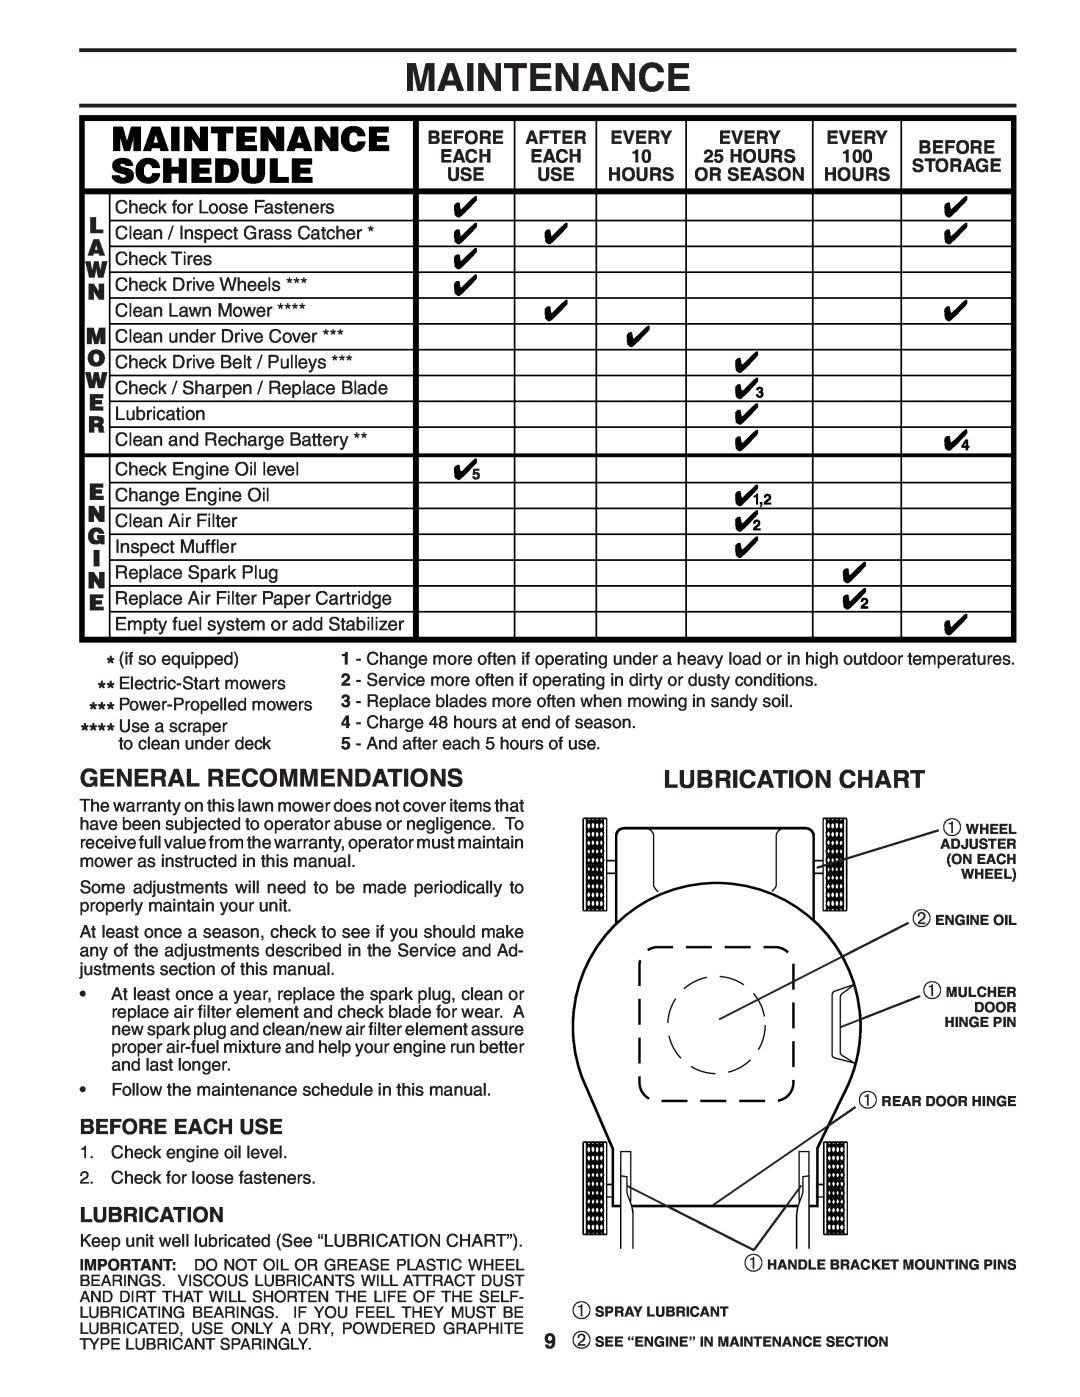 Husqvarna 7021P Maintenance, General Recommendations, Lubrication Chart, Before Each Use, After, Every, Storage, Hours 